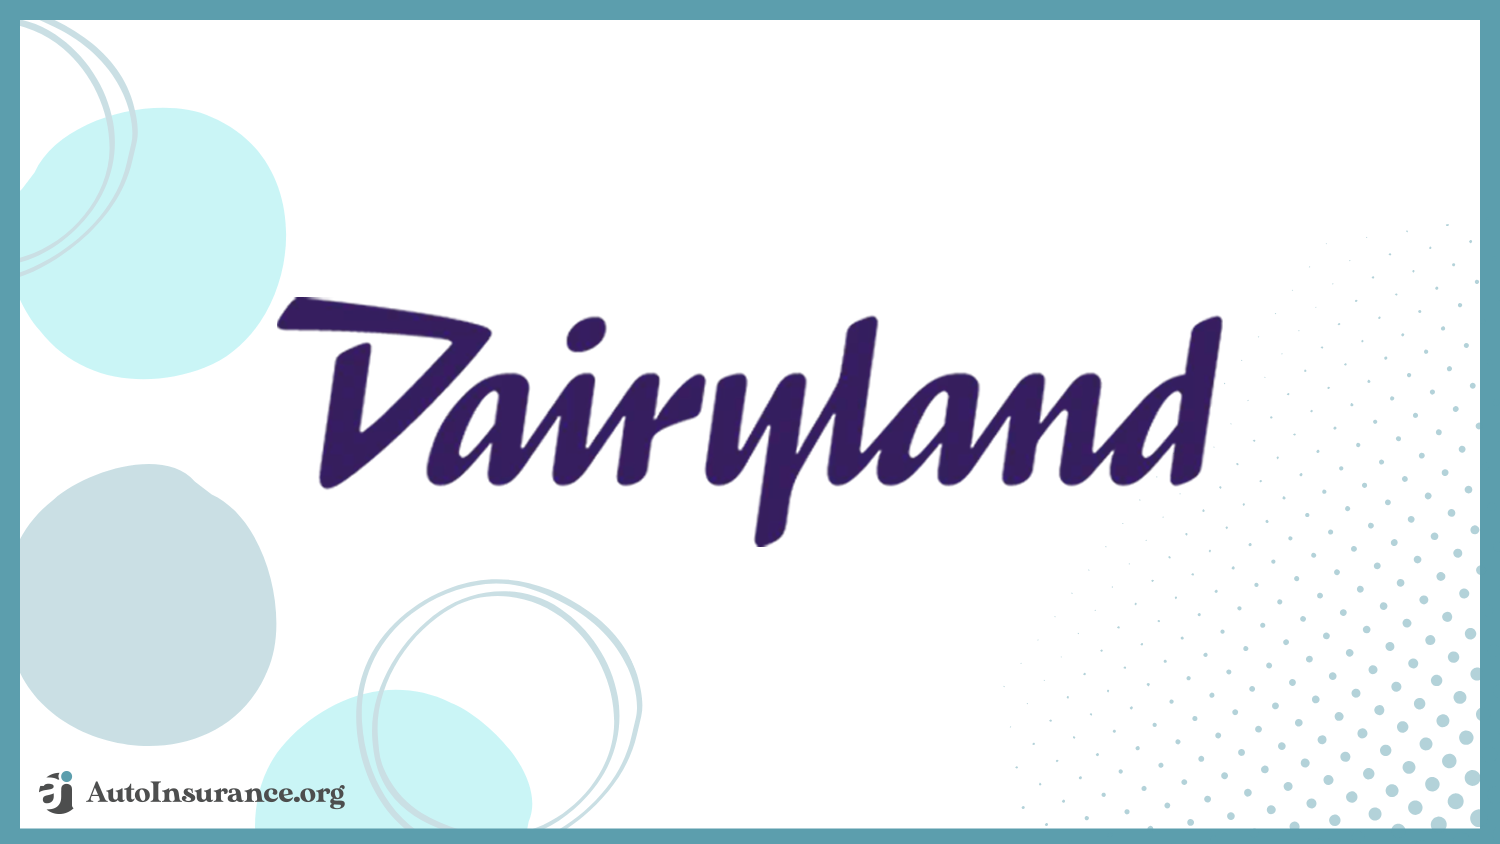 Dairyland: Best Auto Insurance Companies for High-Risk Drivers